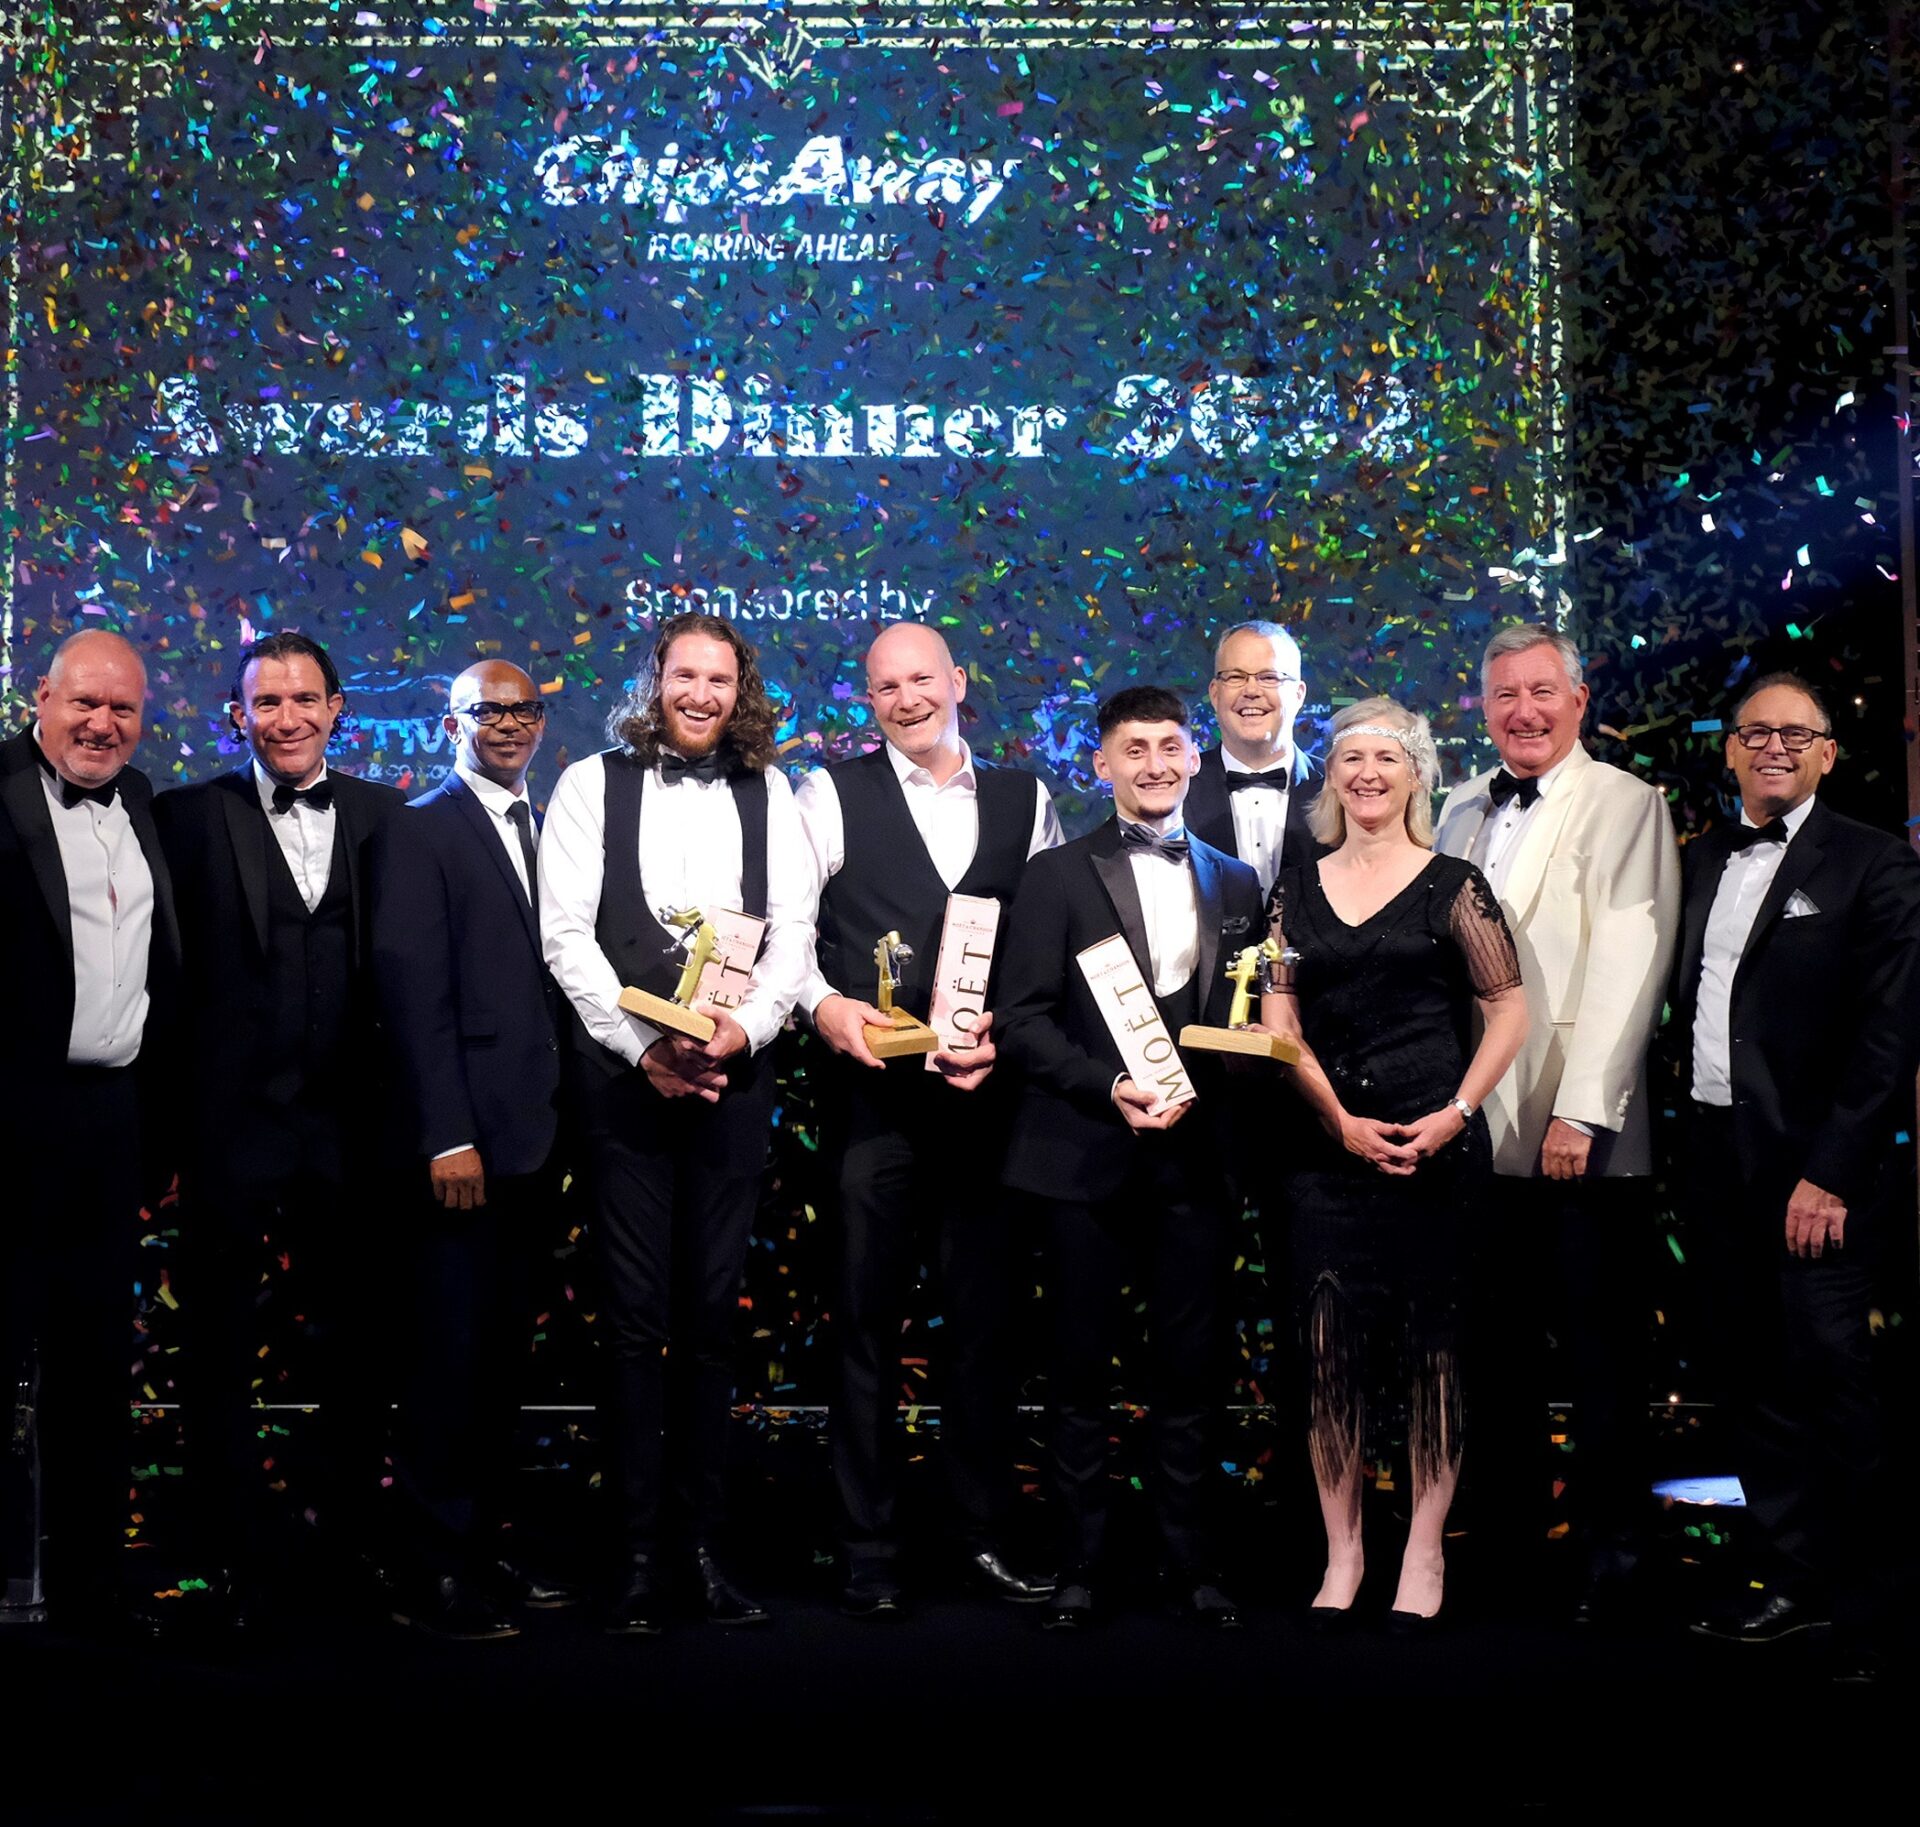 ChipsAway ‘Roars Ahead’ at Annual Conference and 1920’s Awards Dinner